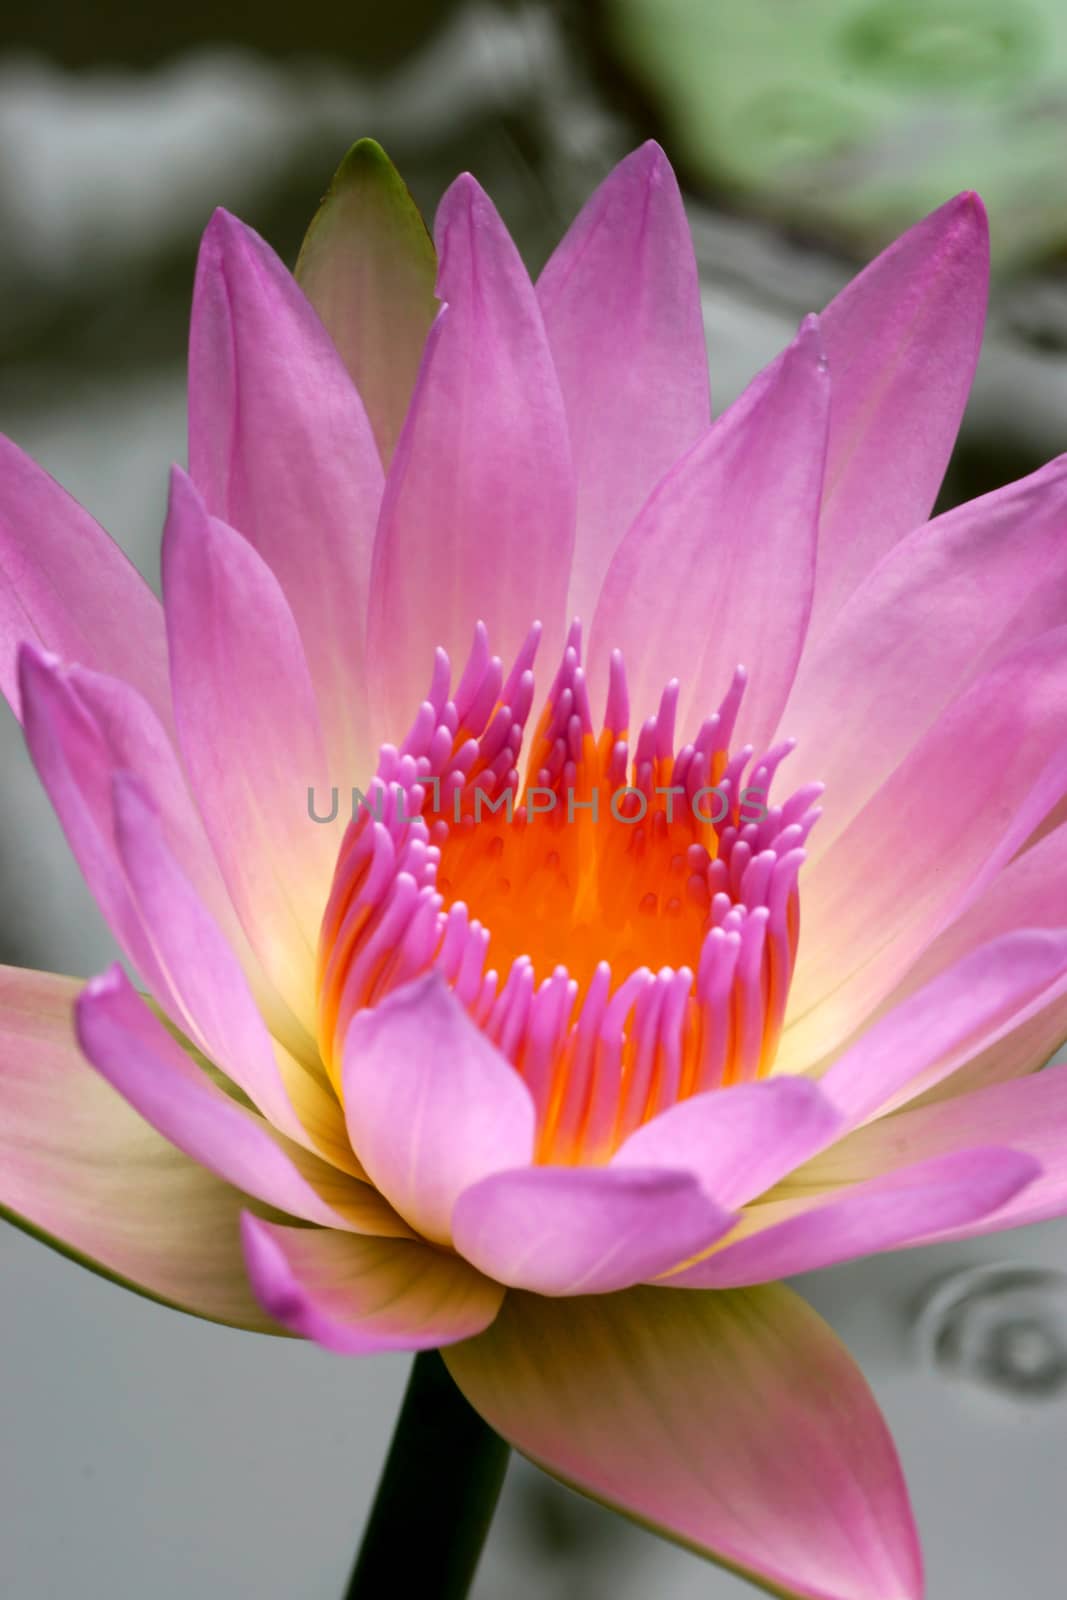 Pink lotus blossoms or water lily flowers blooming by Noppharat_th